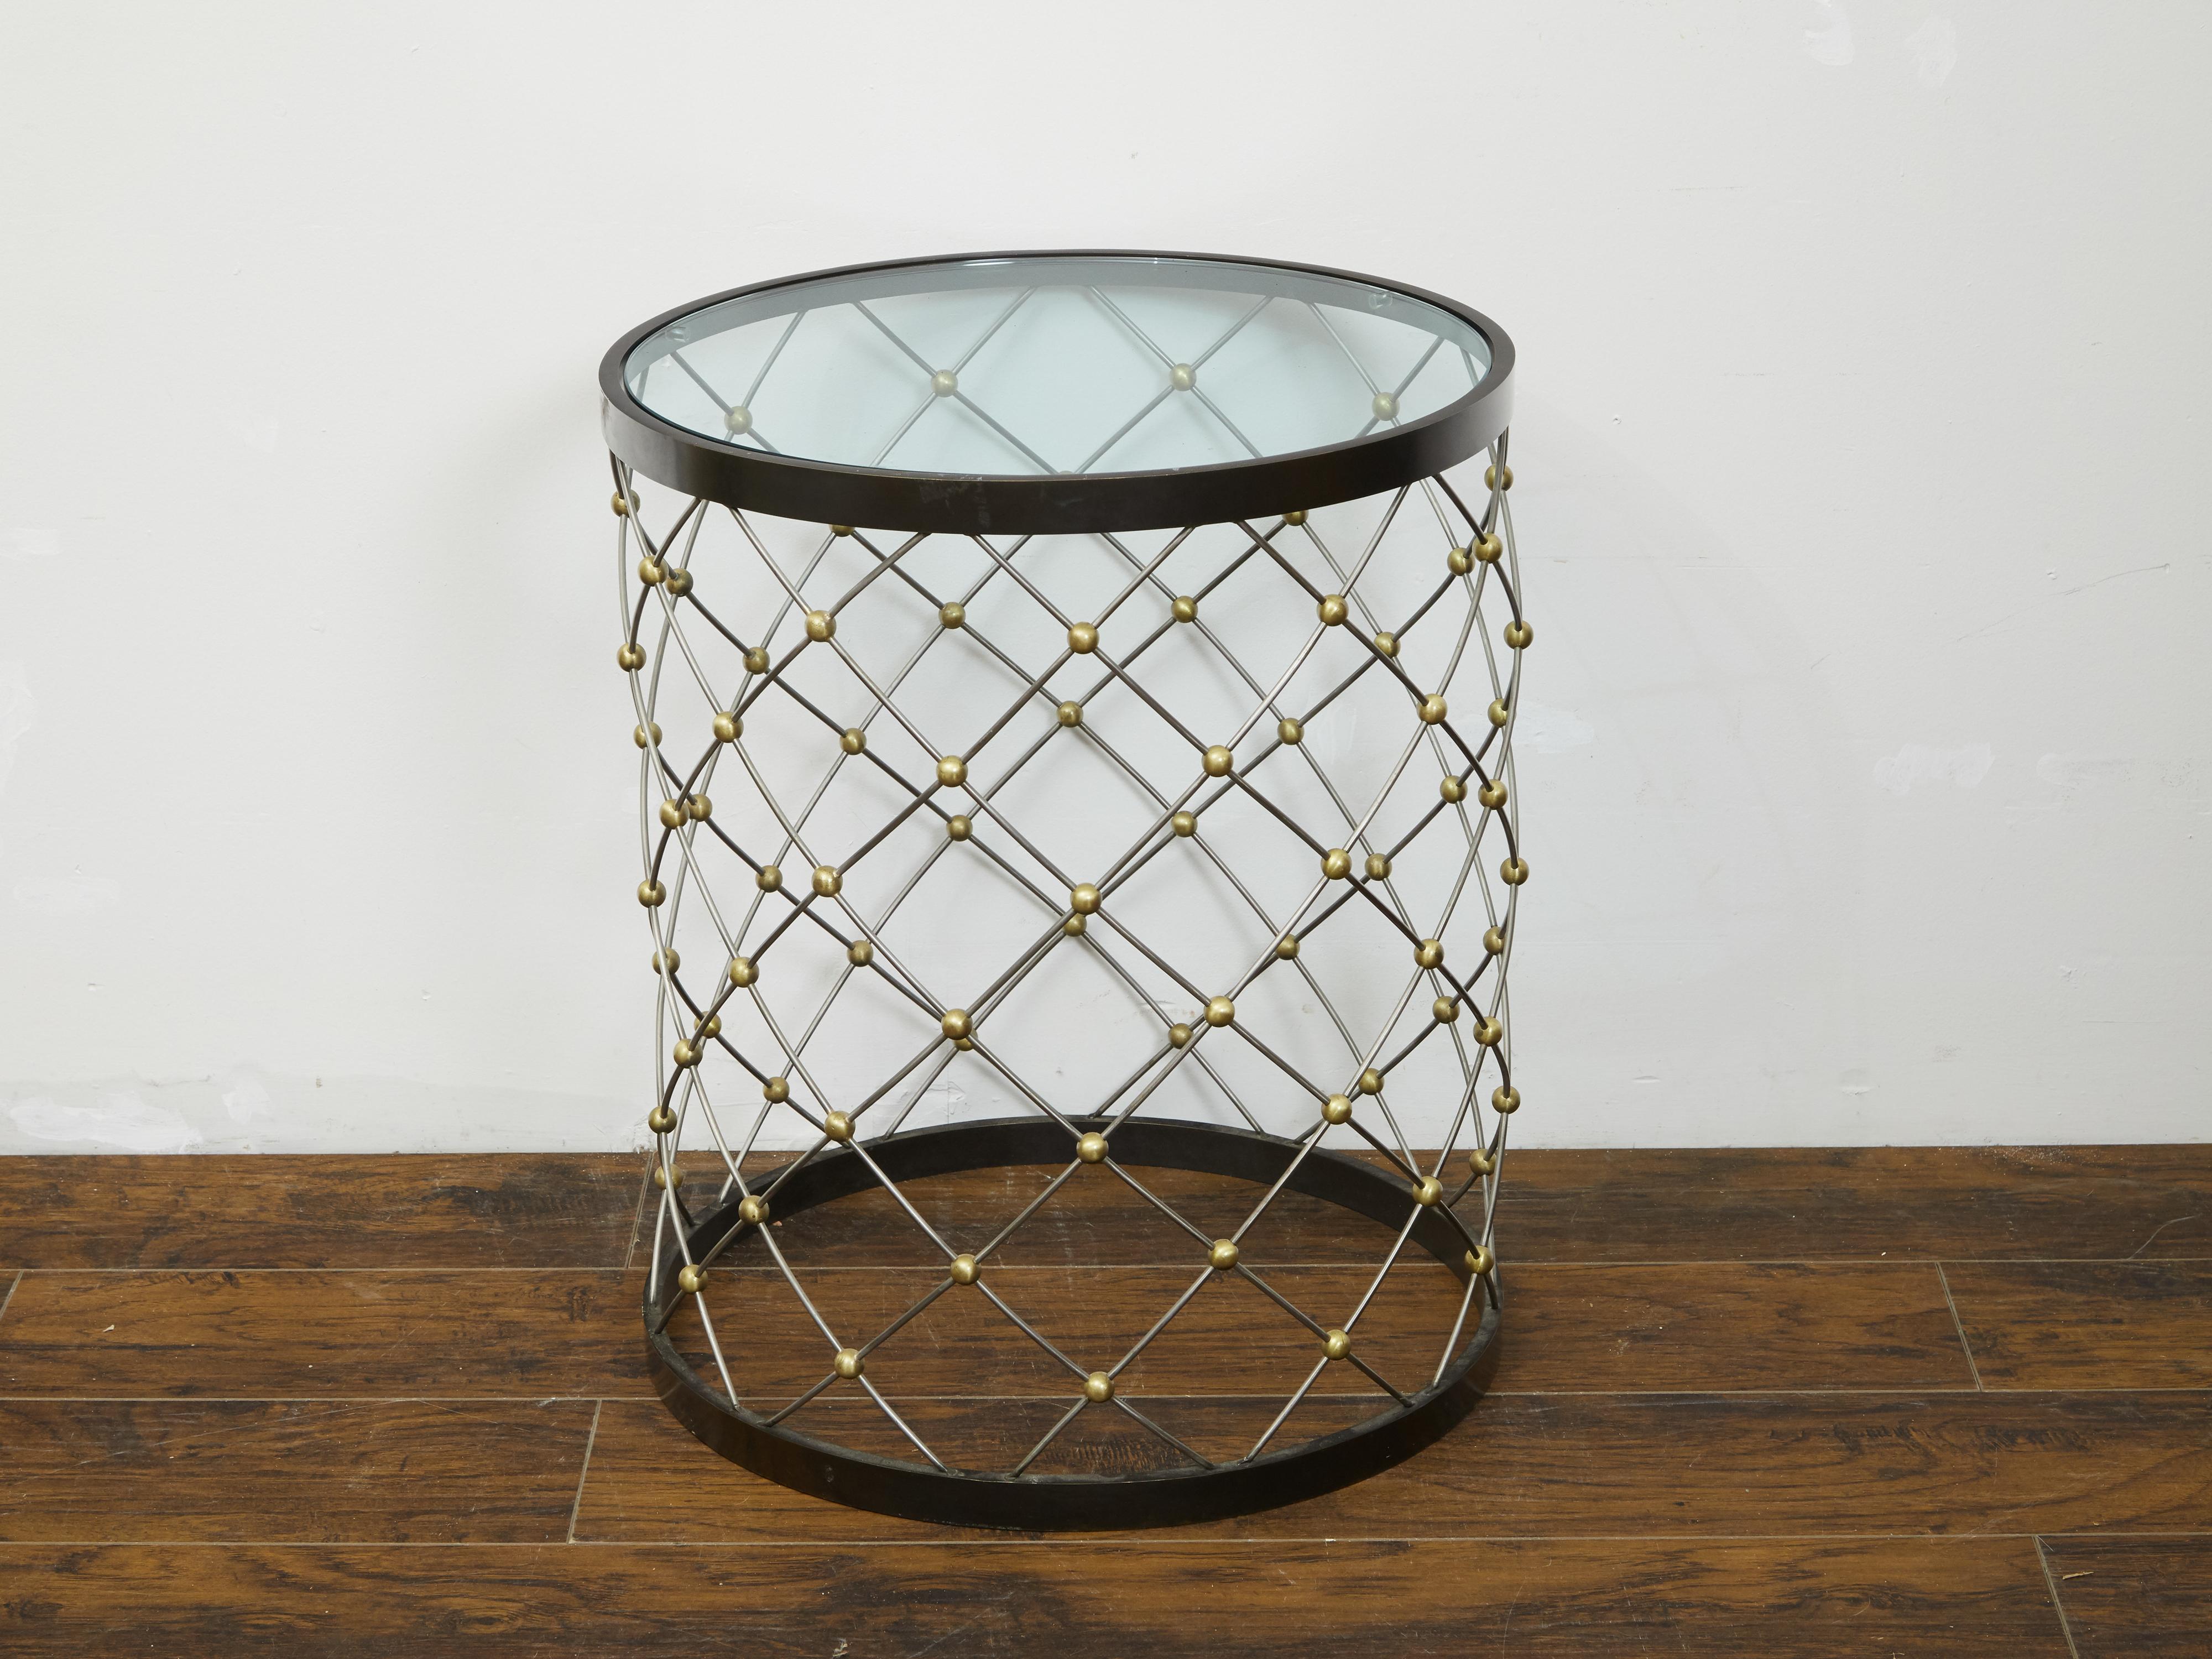 A vintage Italian bronze drum side table from the mid 20th century, with wire style structure and glass top. Created in Italy during the midcentury period, this drum table features a circular glass top resting on a wire-style base accented with